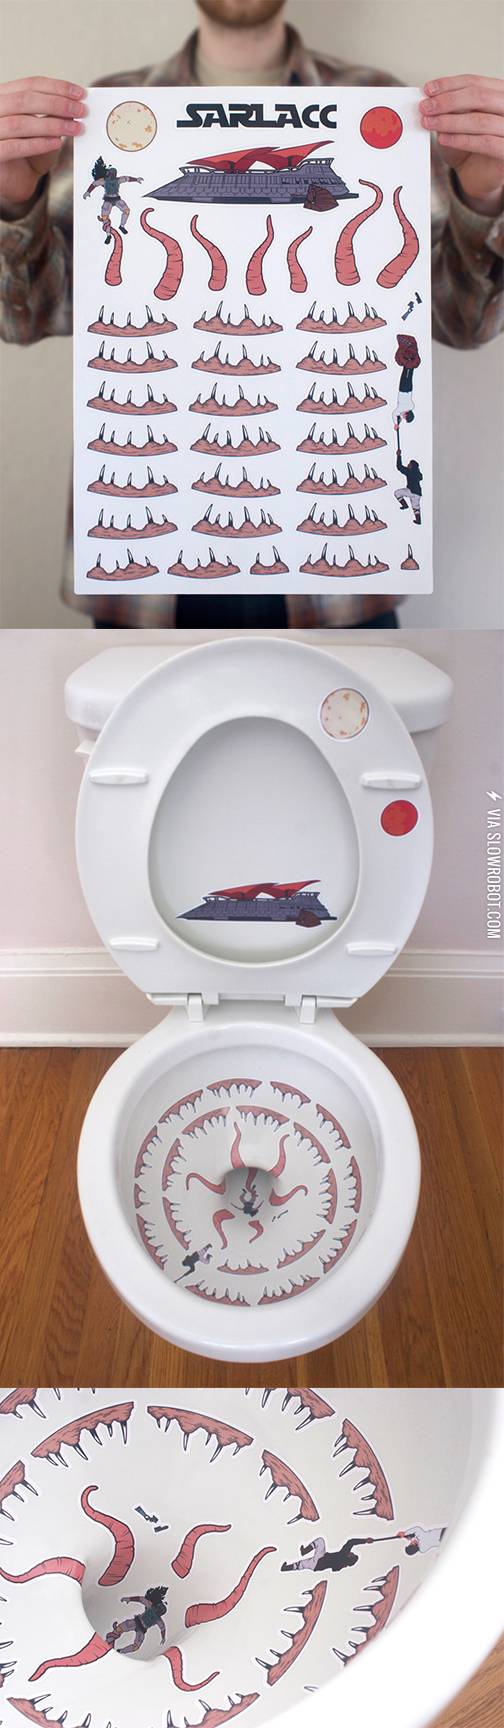 It%26%238217%3Bs+a+Sarlacc+in+your+toilet